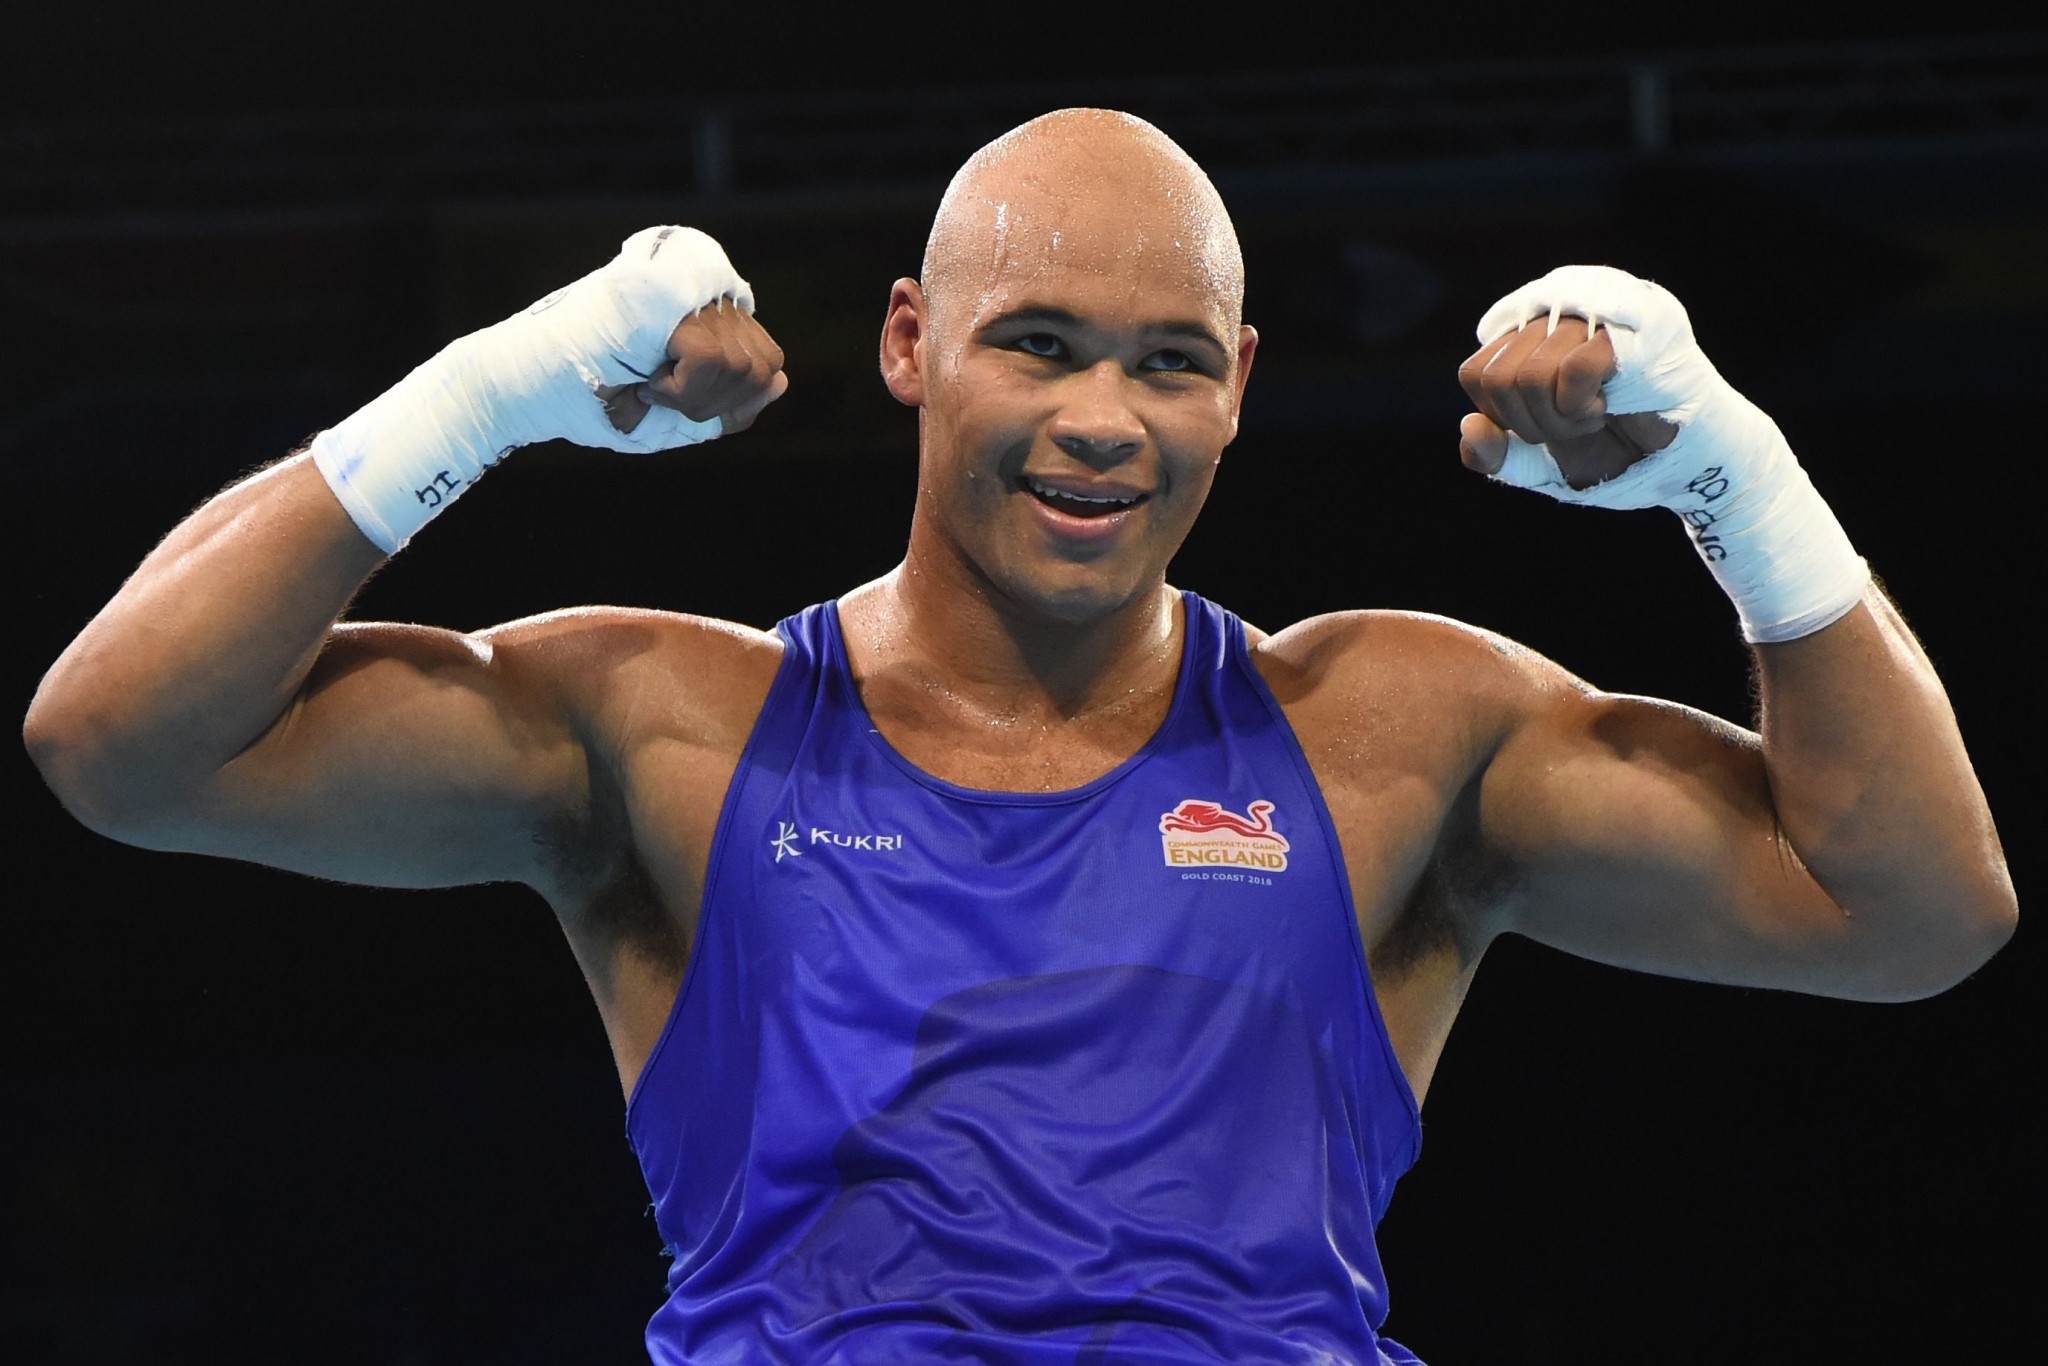 England's Commonwealth Games champion Frazer Clarke won his first bout at the AIBA World Championships ©Getty Images